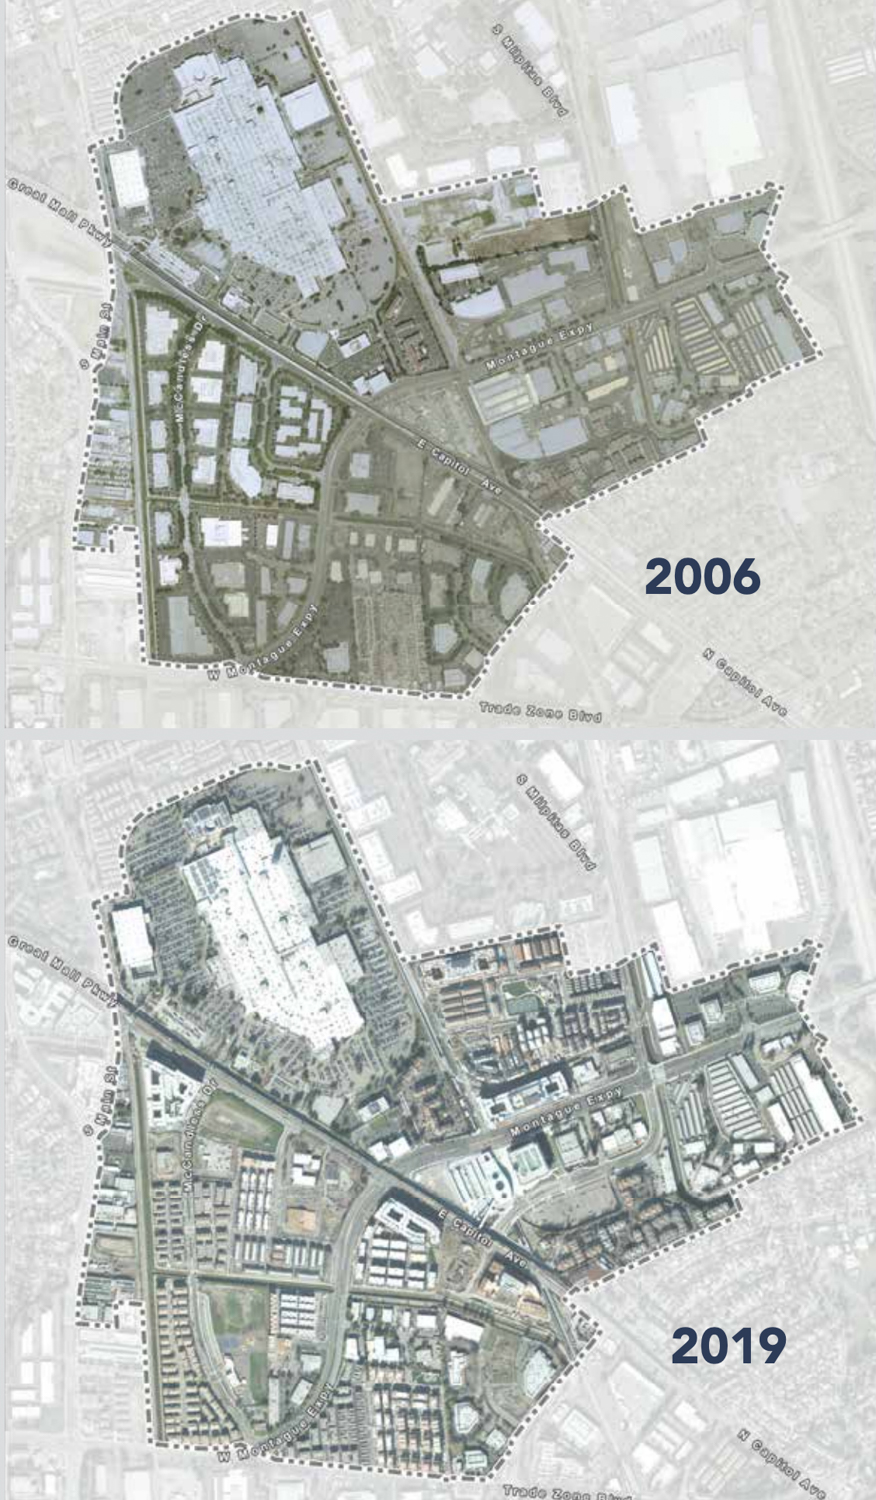 Milpitas Metro area comparison between 2006 and 2019 of construction progress, image via the City of Milpitas using Google Earth imagery